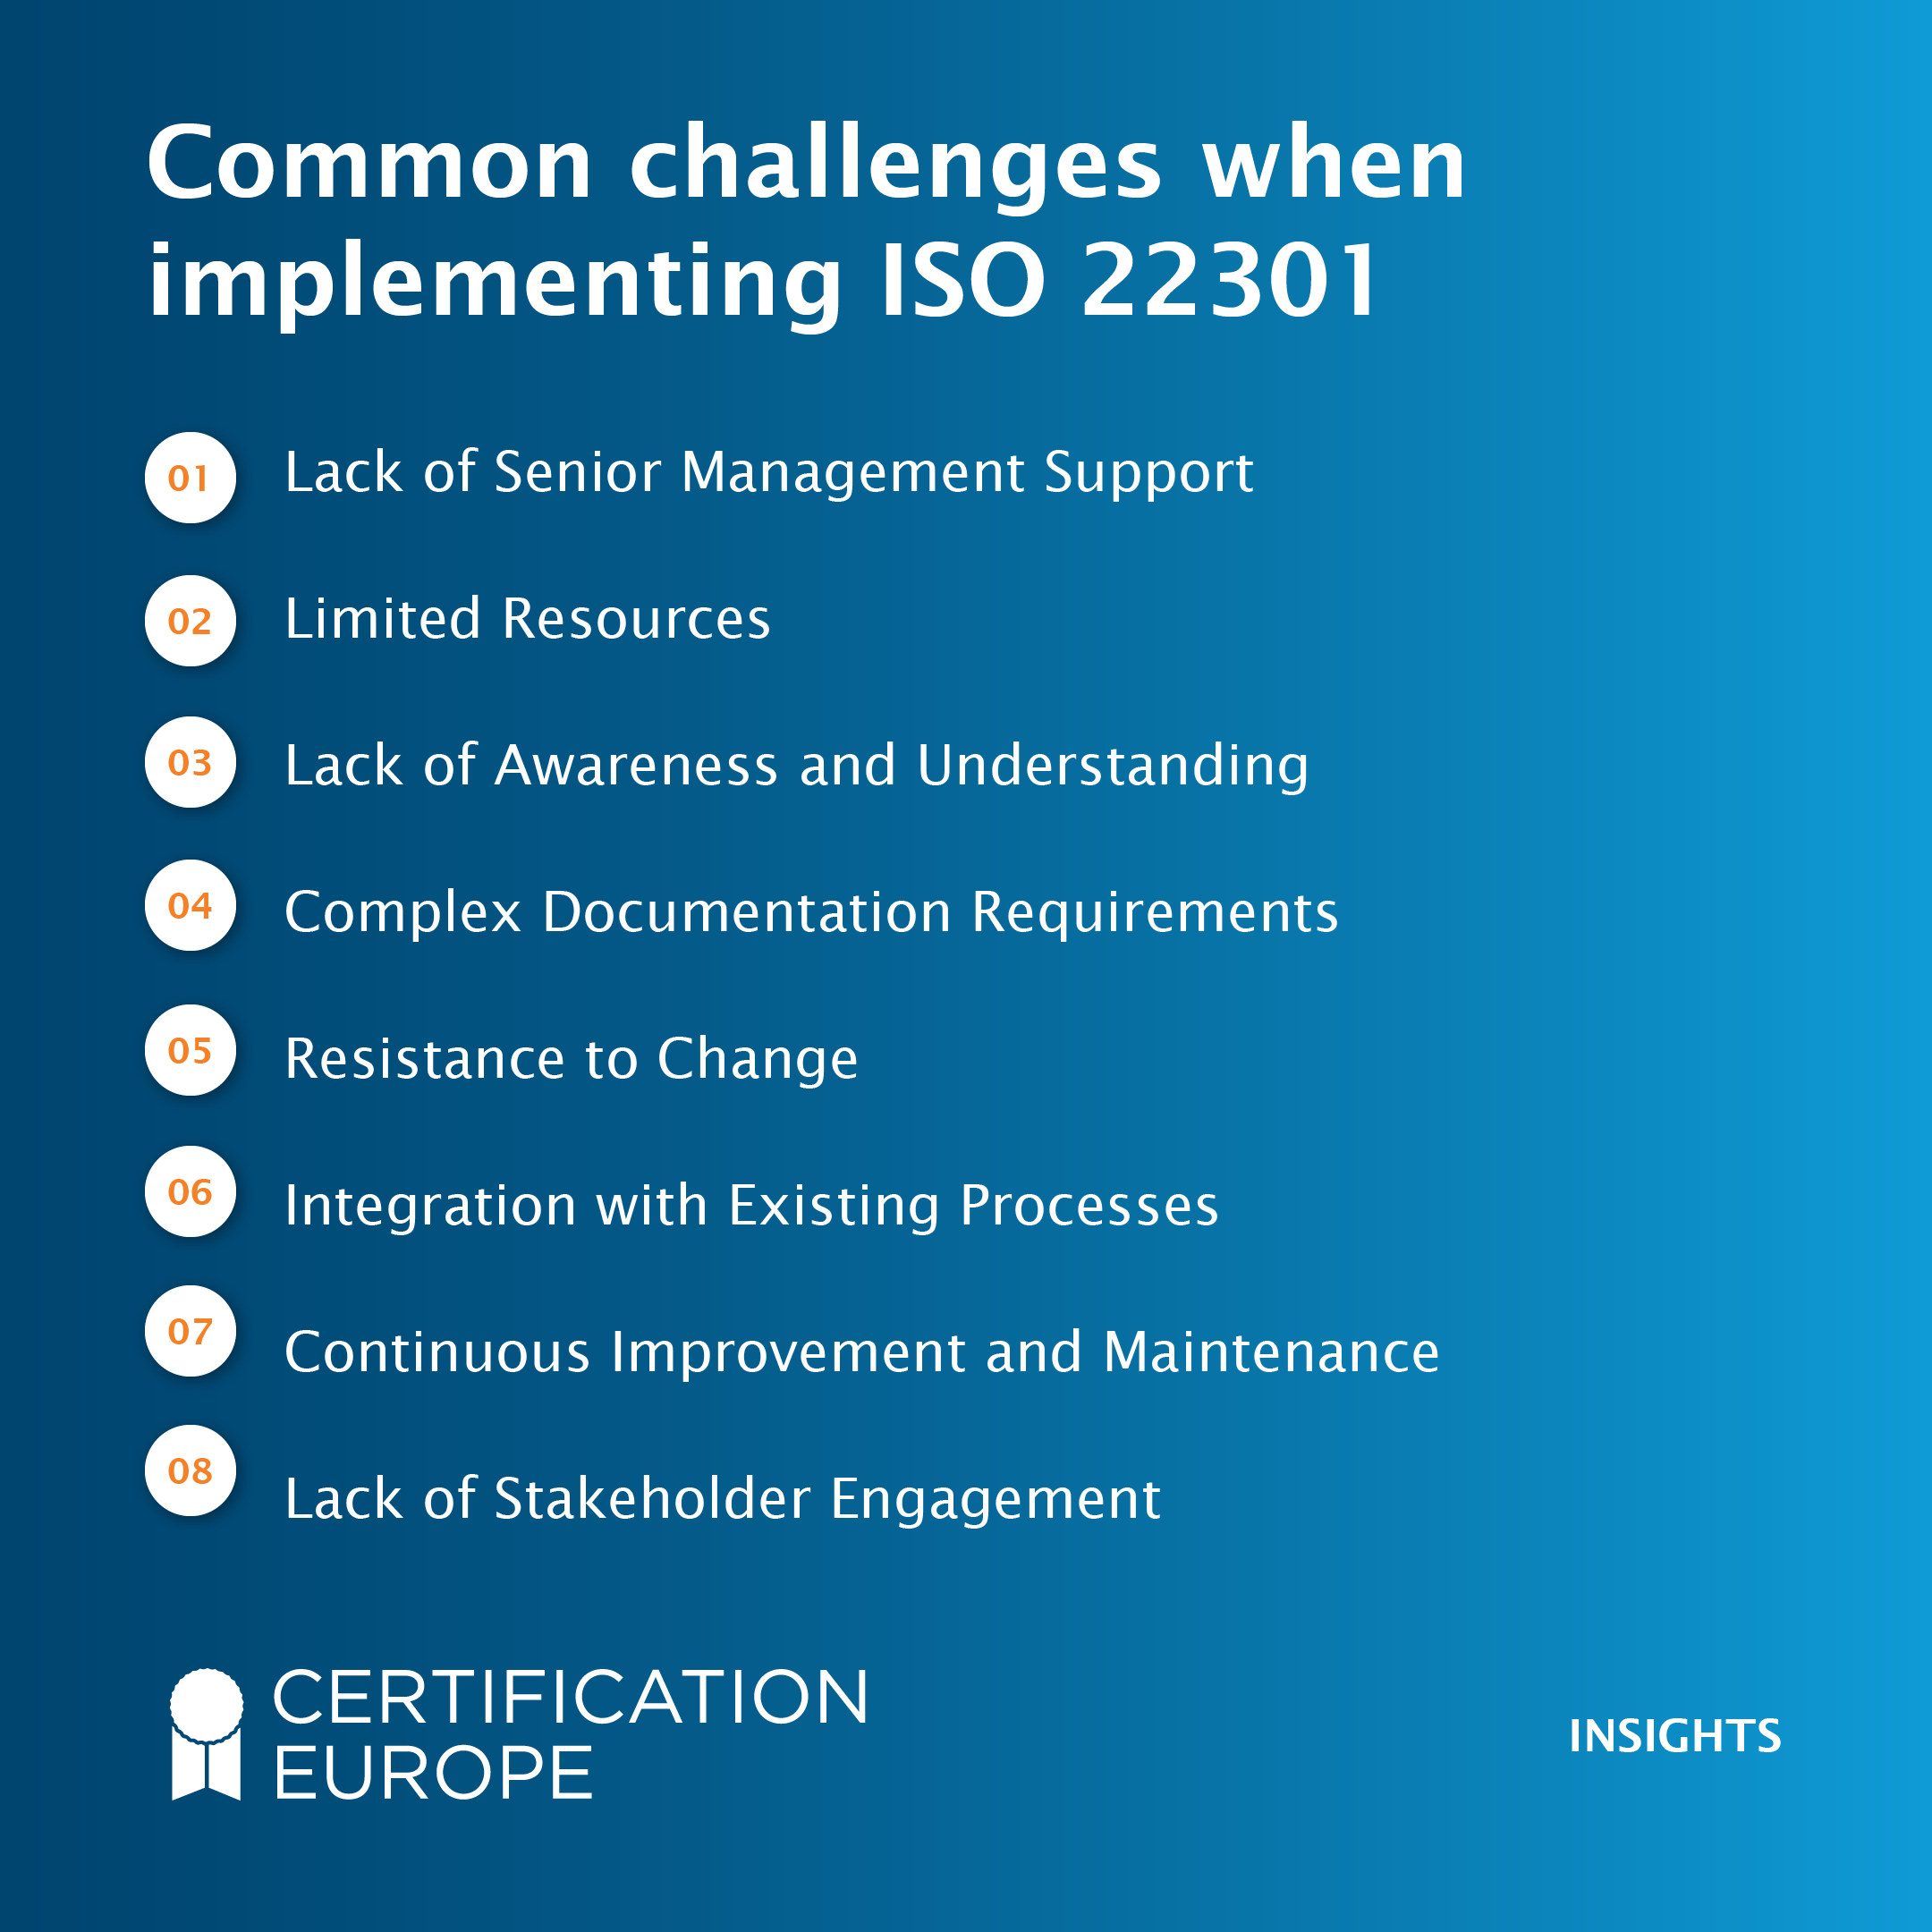 Common challenges when implementing ISO 22301